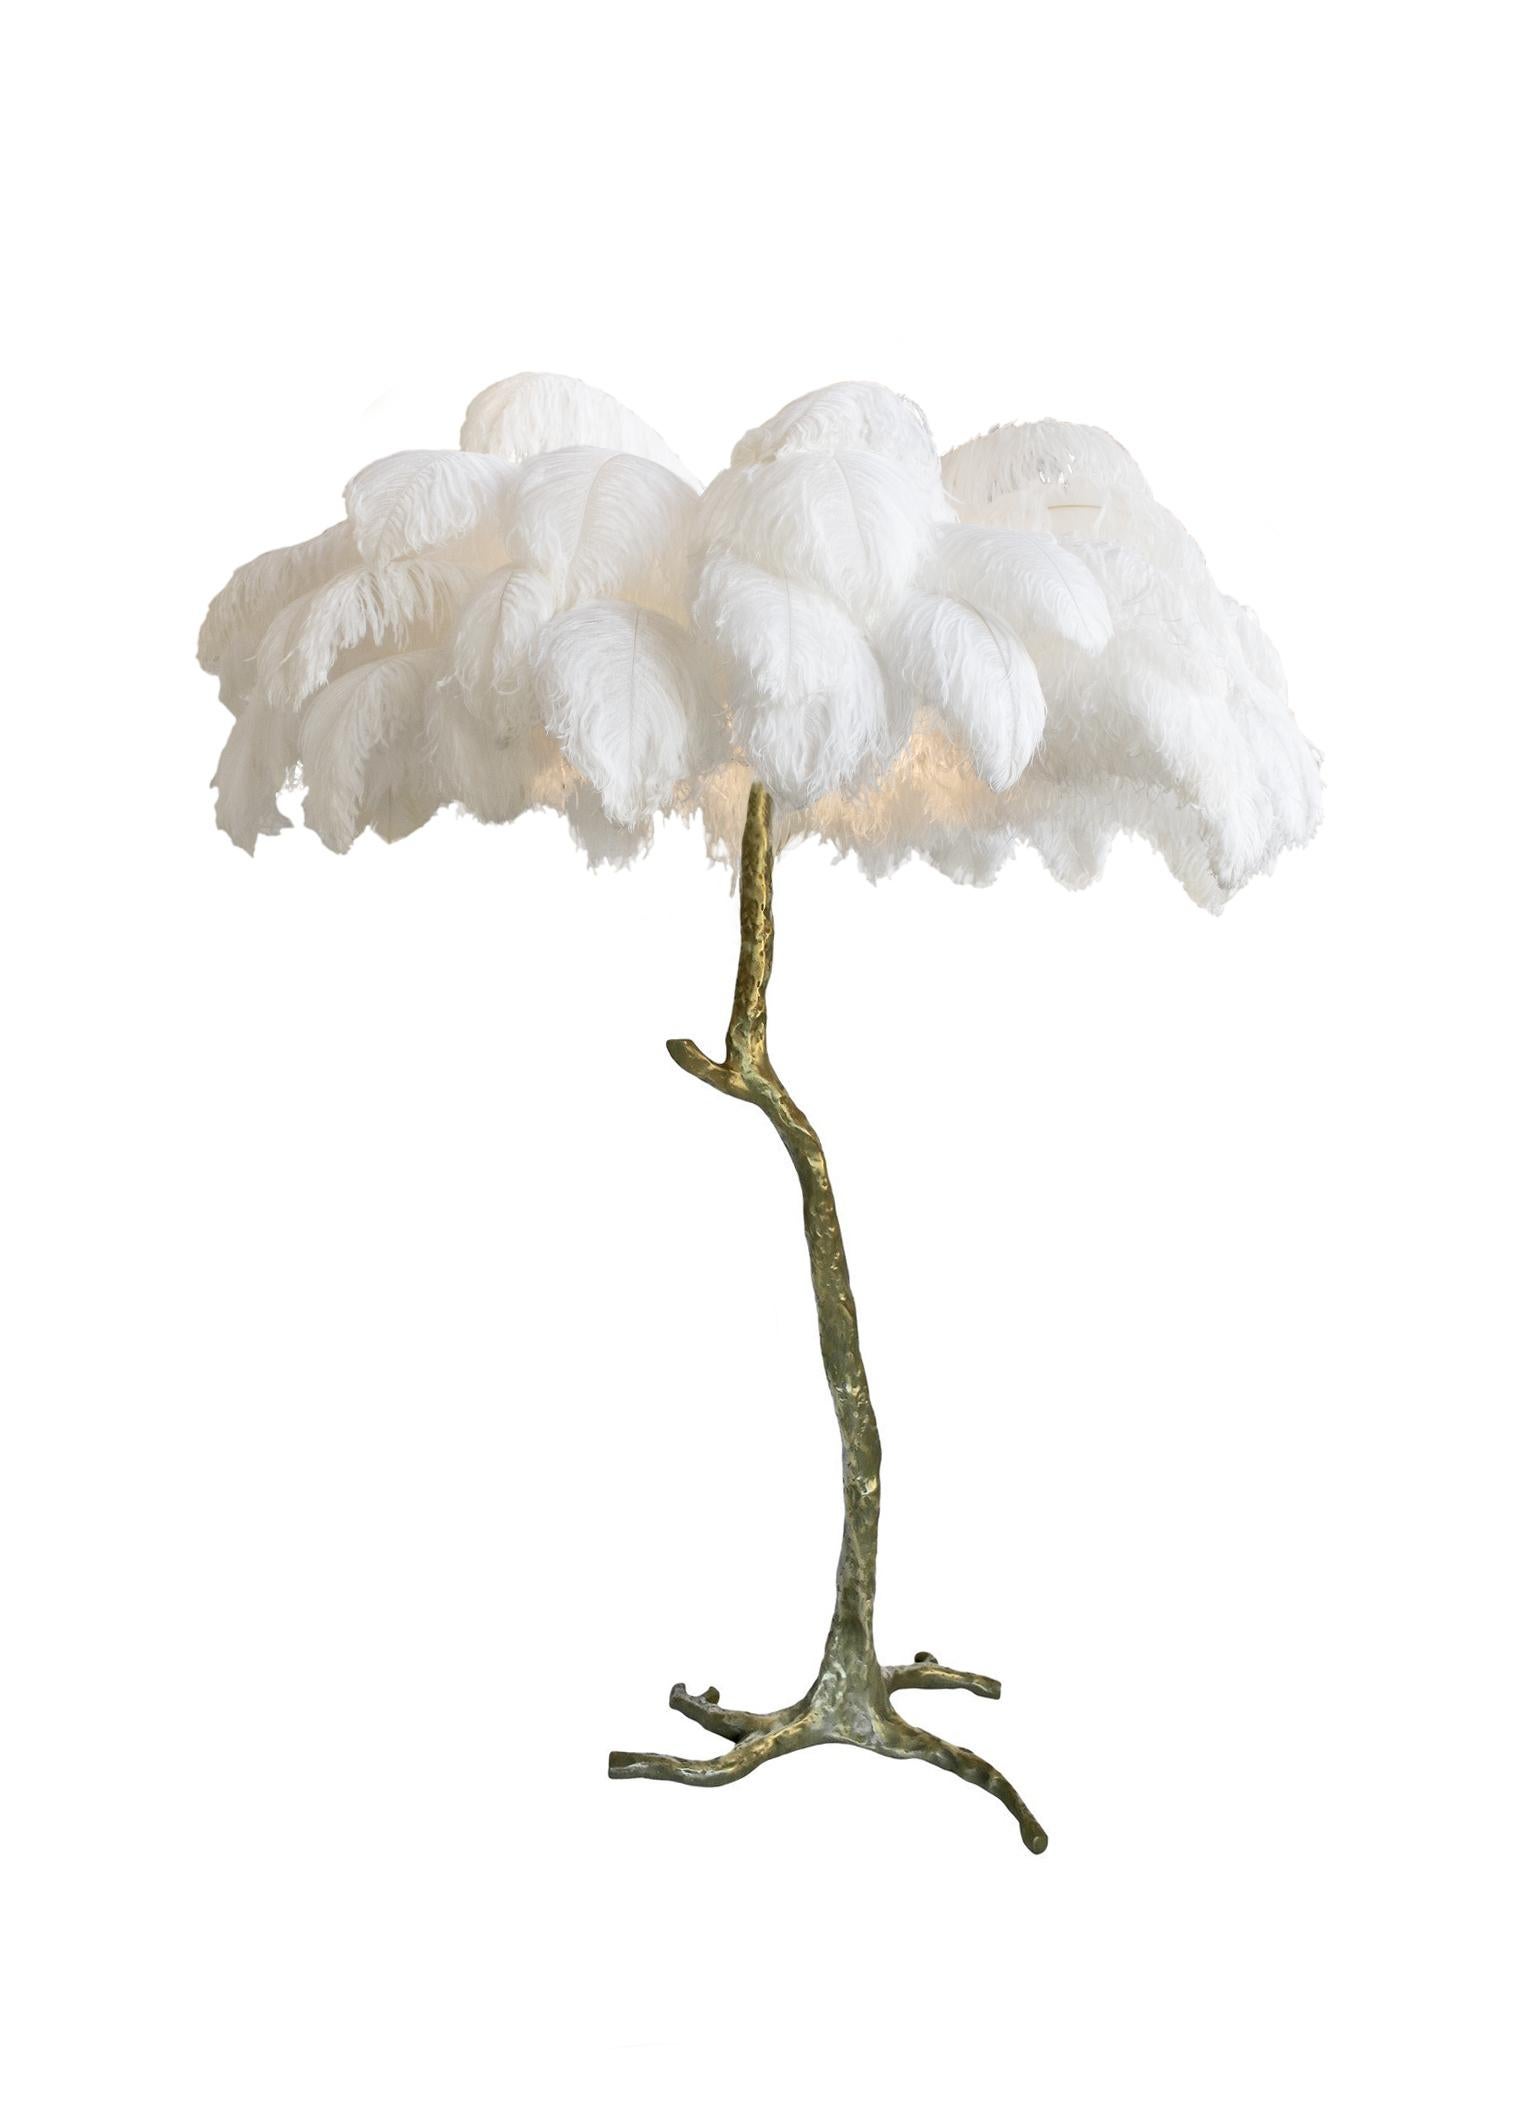 The Feather Floor Lamp, edition piece by A Modern Grand Tour.
An illuminating palm tree, resplendent with exquisite ostrich feather foliage, the feather floor lamp takes centre stage in any luxury setting and delivers the ultimate midas touch to